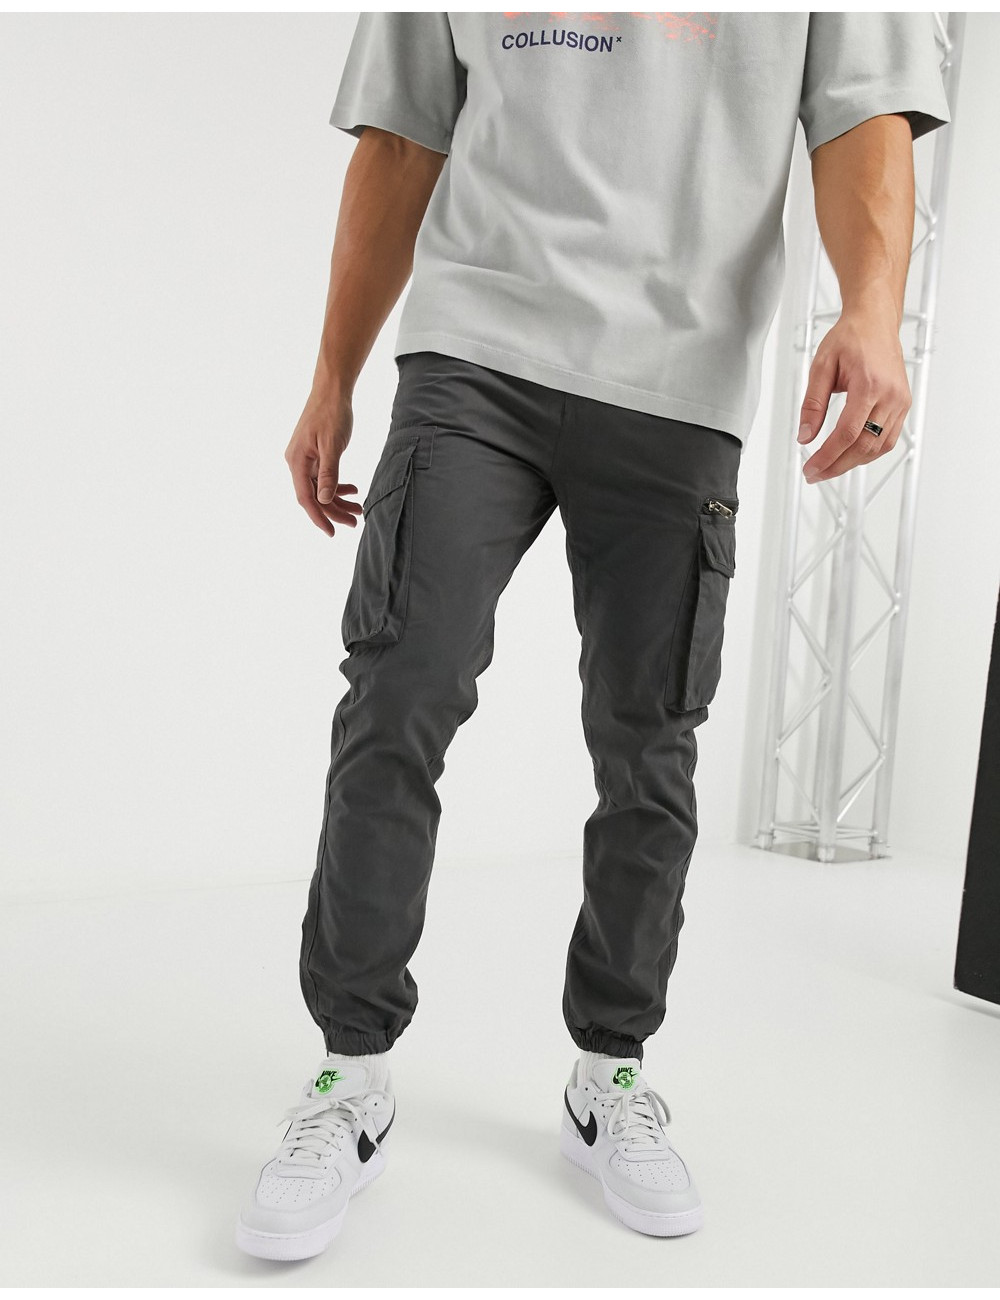 River Island tapered cargo...